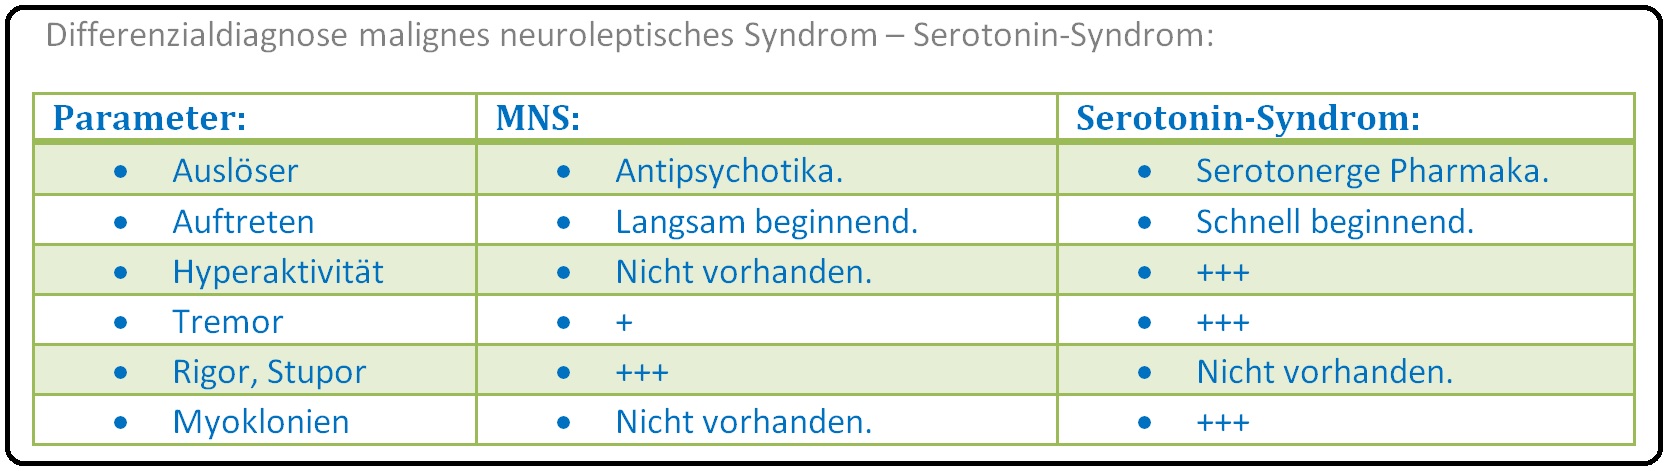 628 Differenzialdiagnose malignes neuroleptisches Syndrom   Serotonerges Syndrom